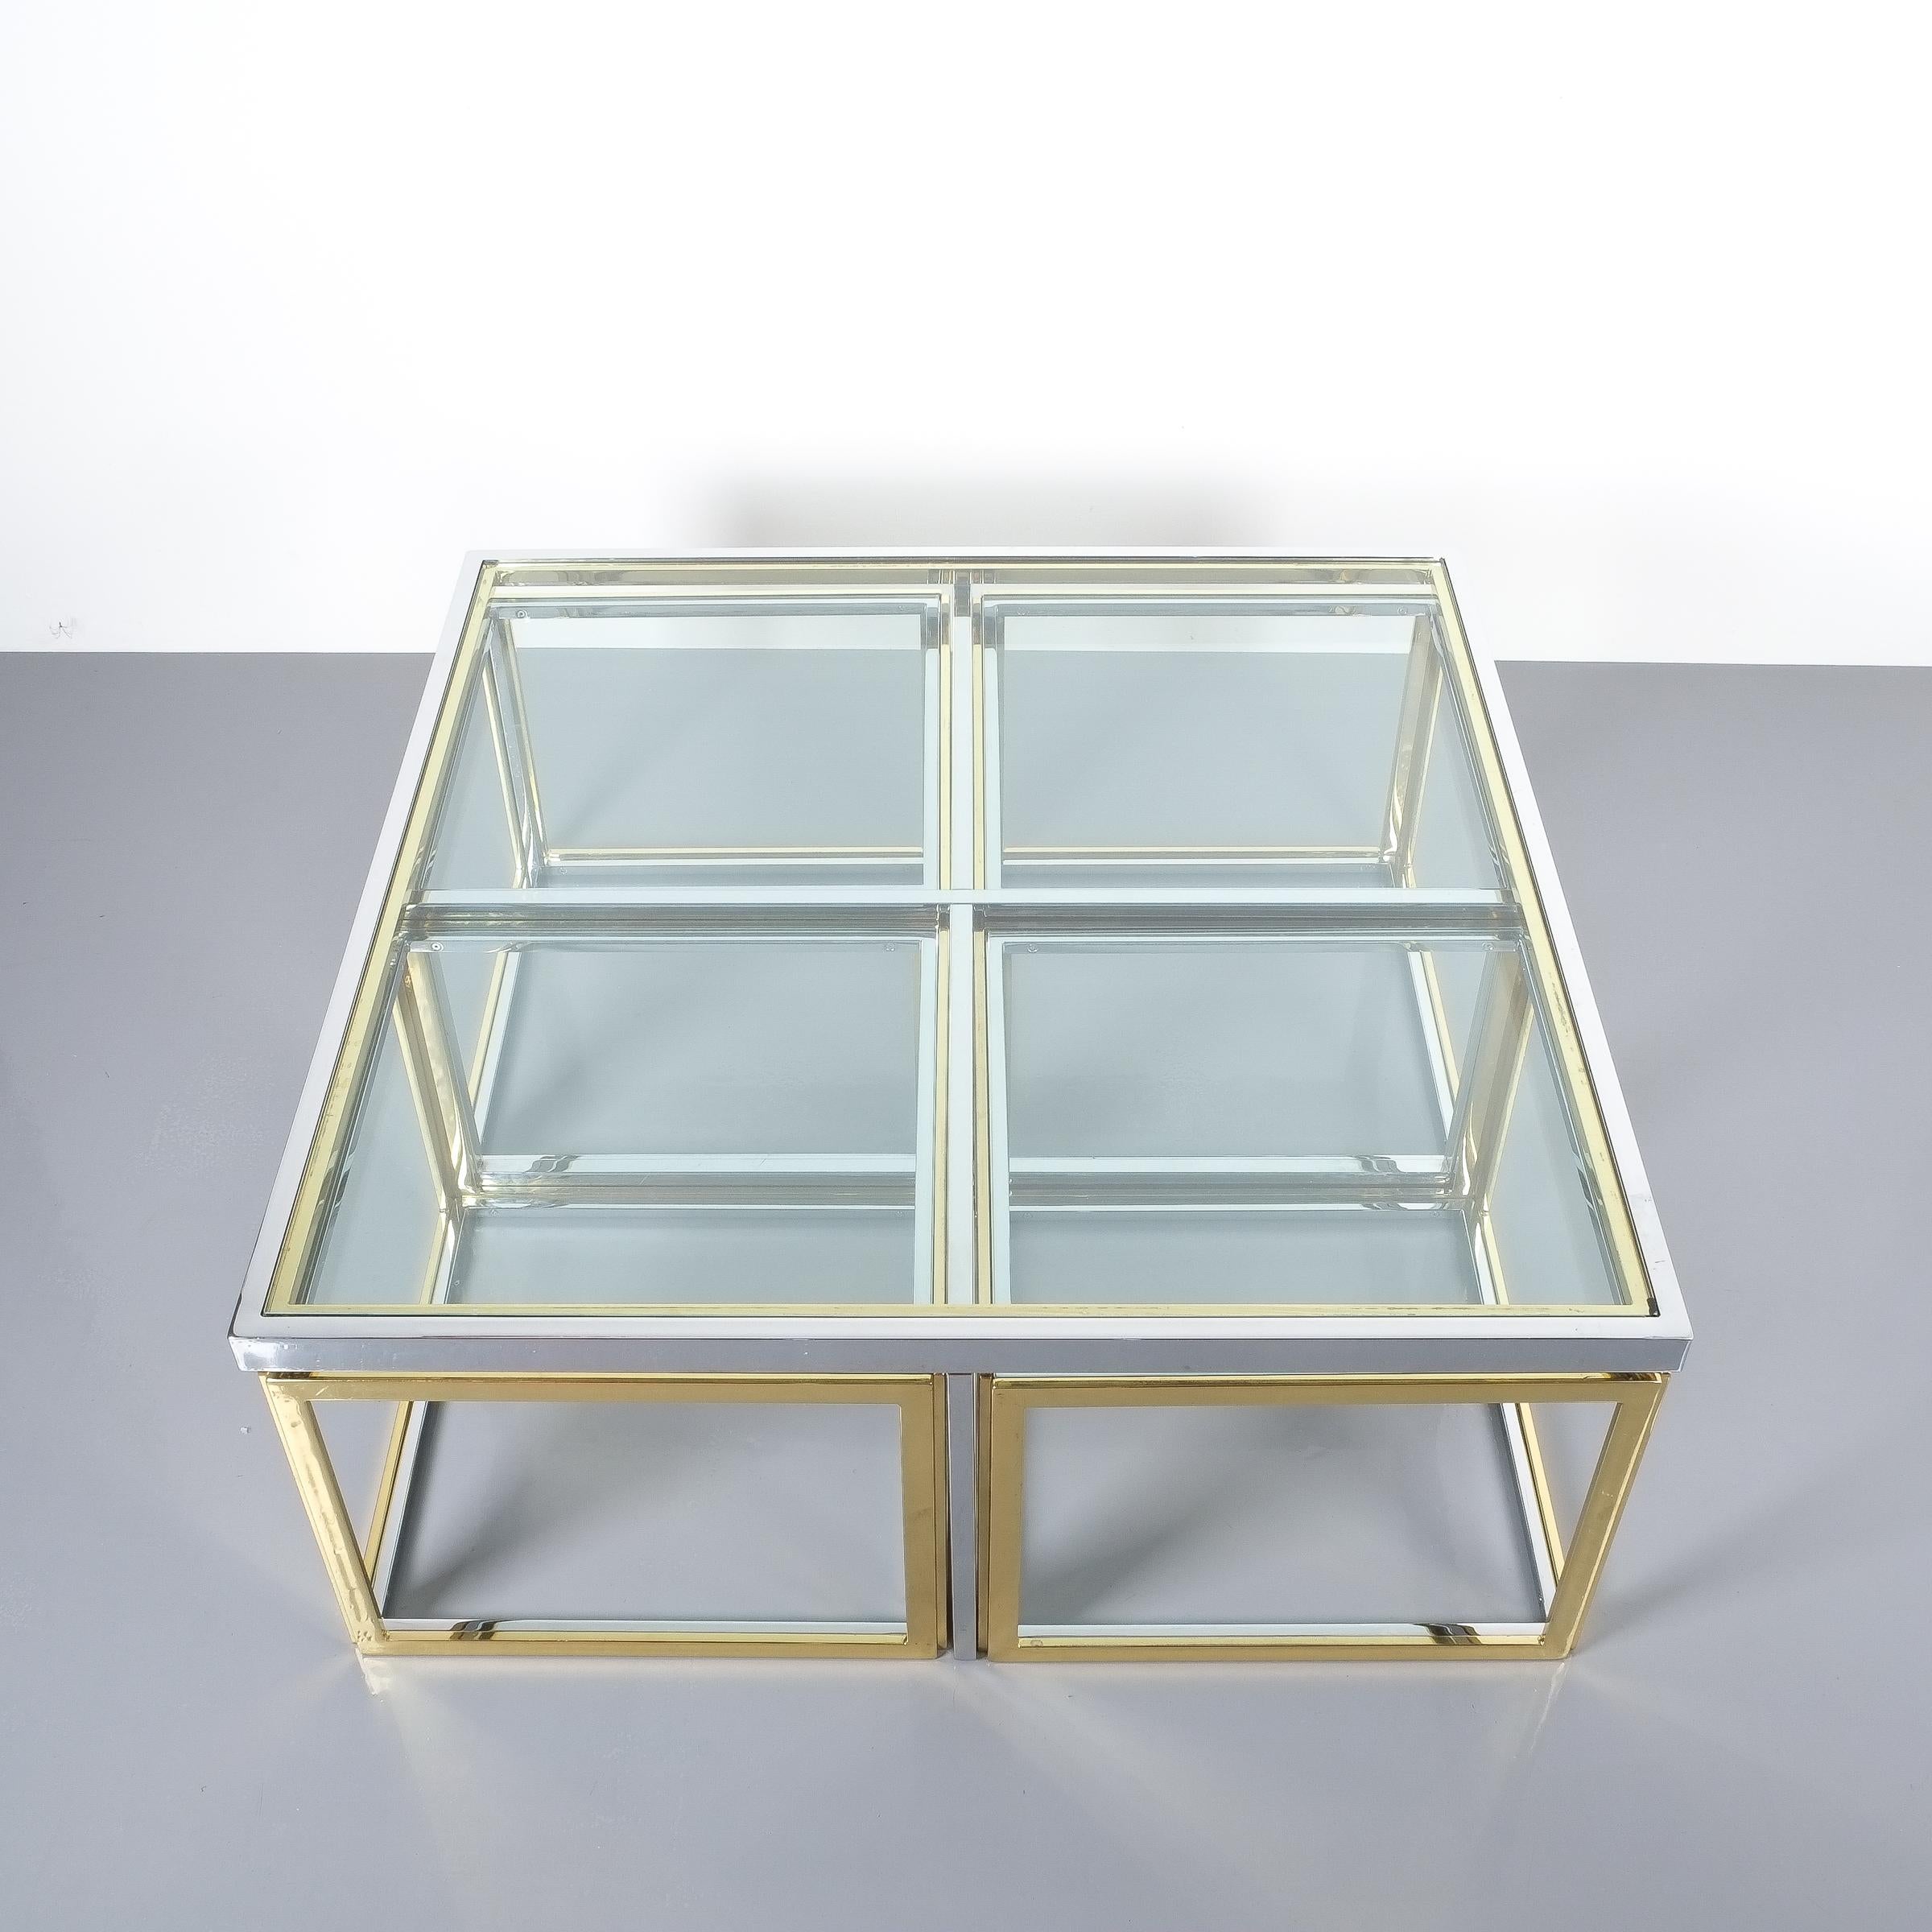 Square segment bicolor brass glass coffee table by Maison Charles, France, 1975. Vintage square brass coffee table with four removable segments featuring customized clear glass table tops and brass and chrome hardware/bases. The condition is very